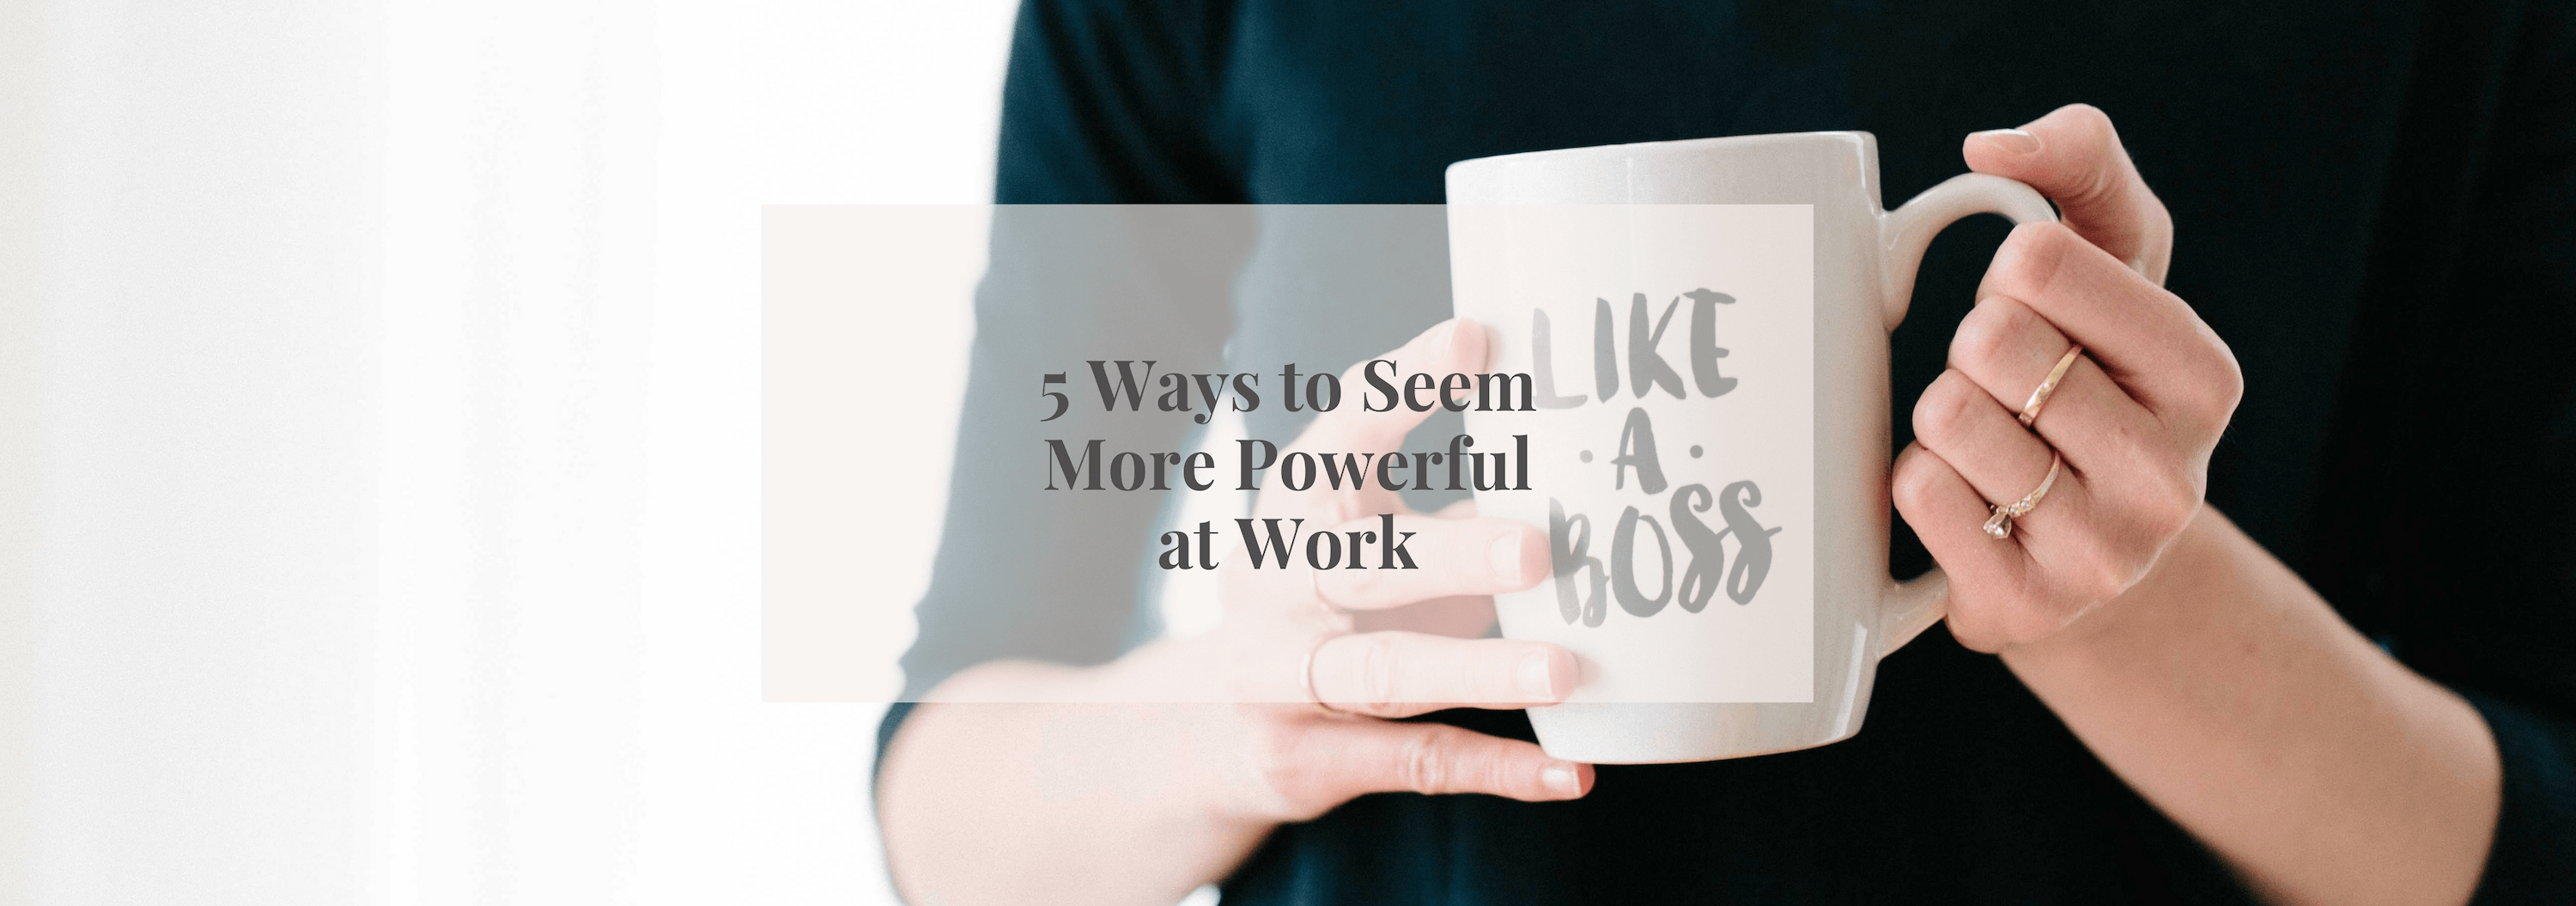 5 Ways to Seem More Powerful at Work - Numi